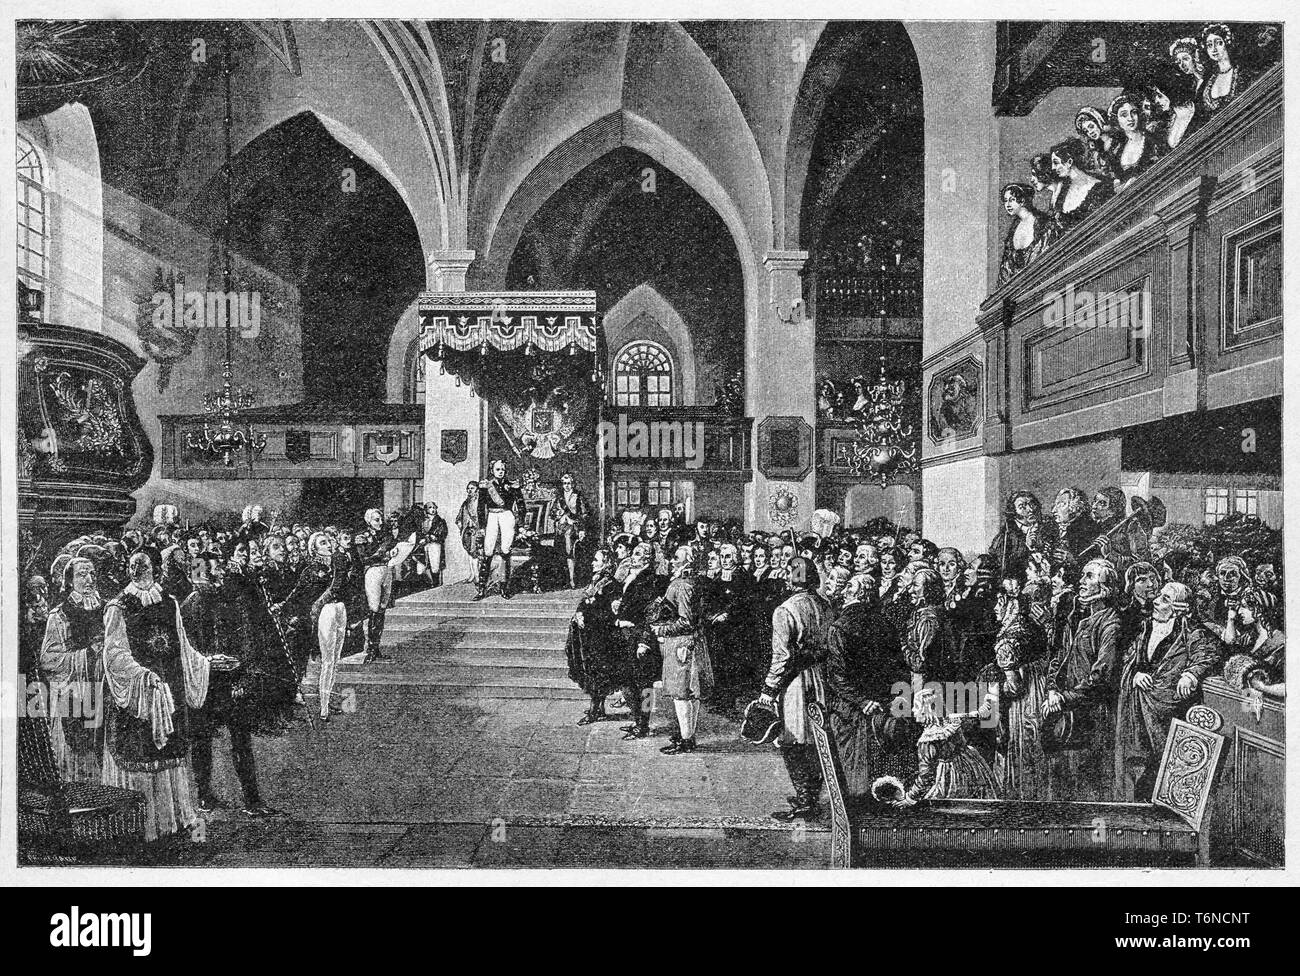 Opening of the Sejm in Borgo, March 16, 1809. Digital improved reproduction from Illustrated overview of the life of mankind in the 19th century, 1901 edition, Marx publishing house, St. Petersburg. Stock Photo